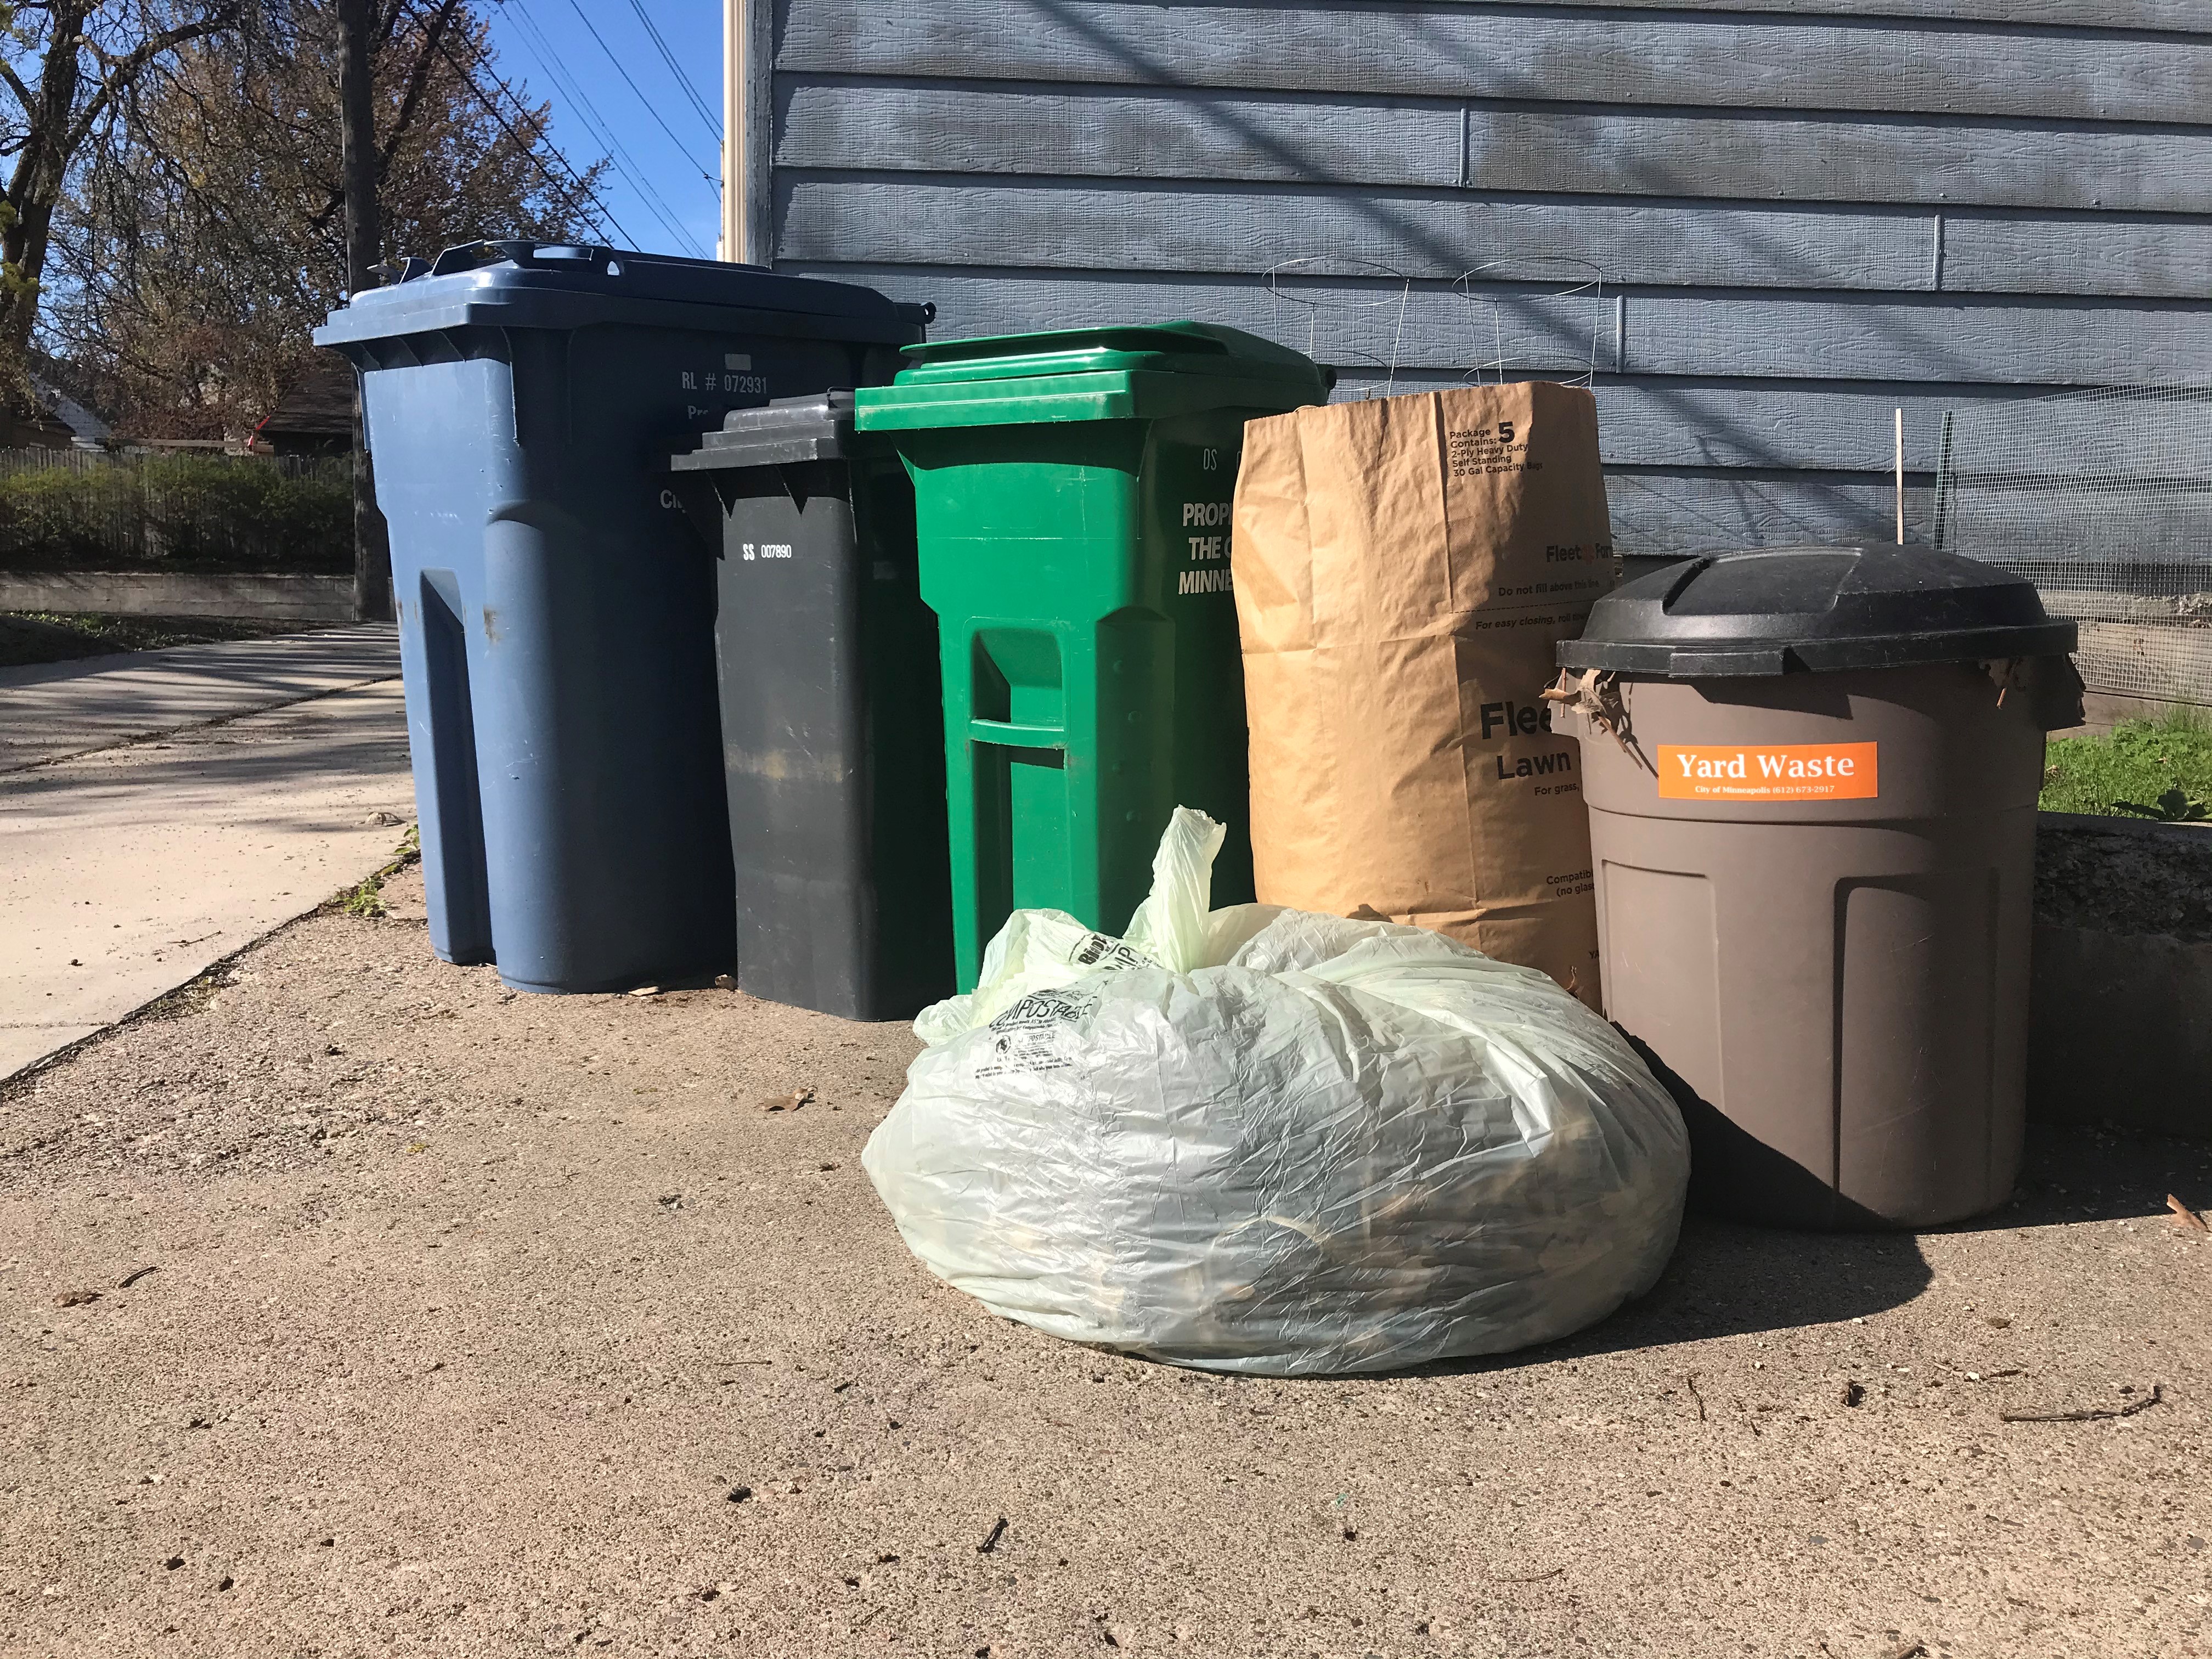 Yard waste in compostable bags and a reusable container